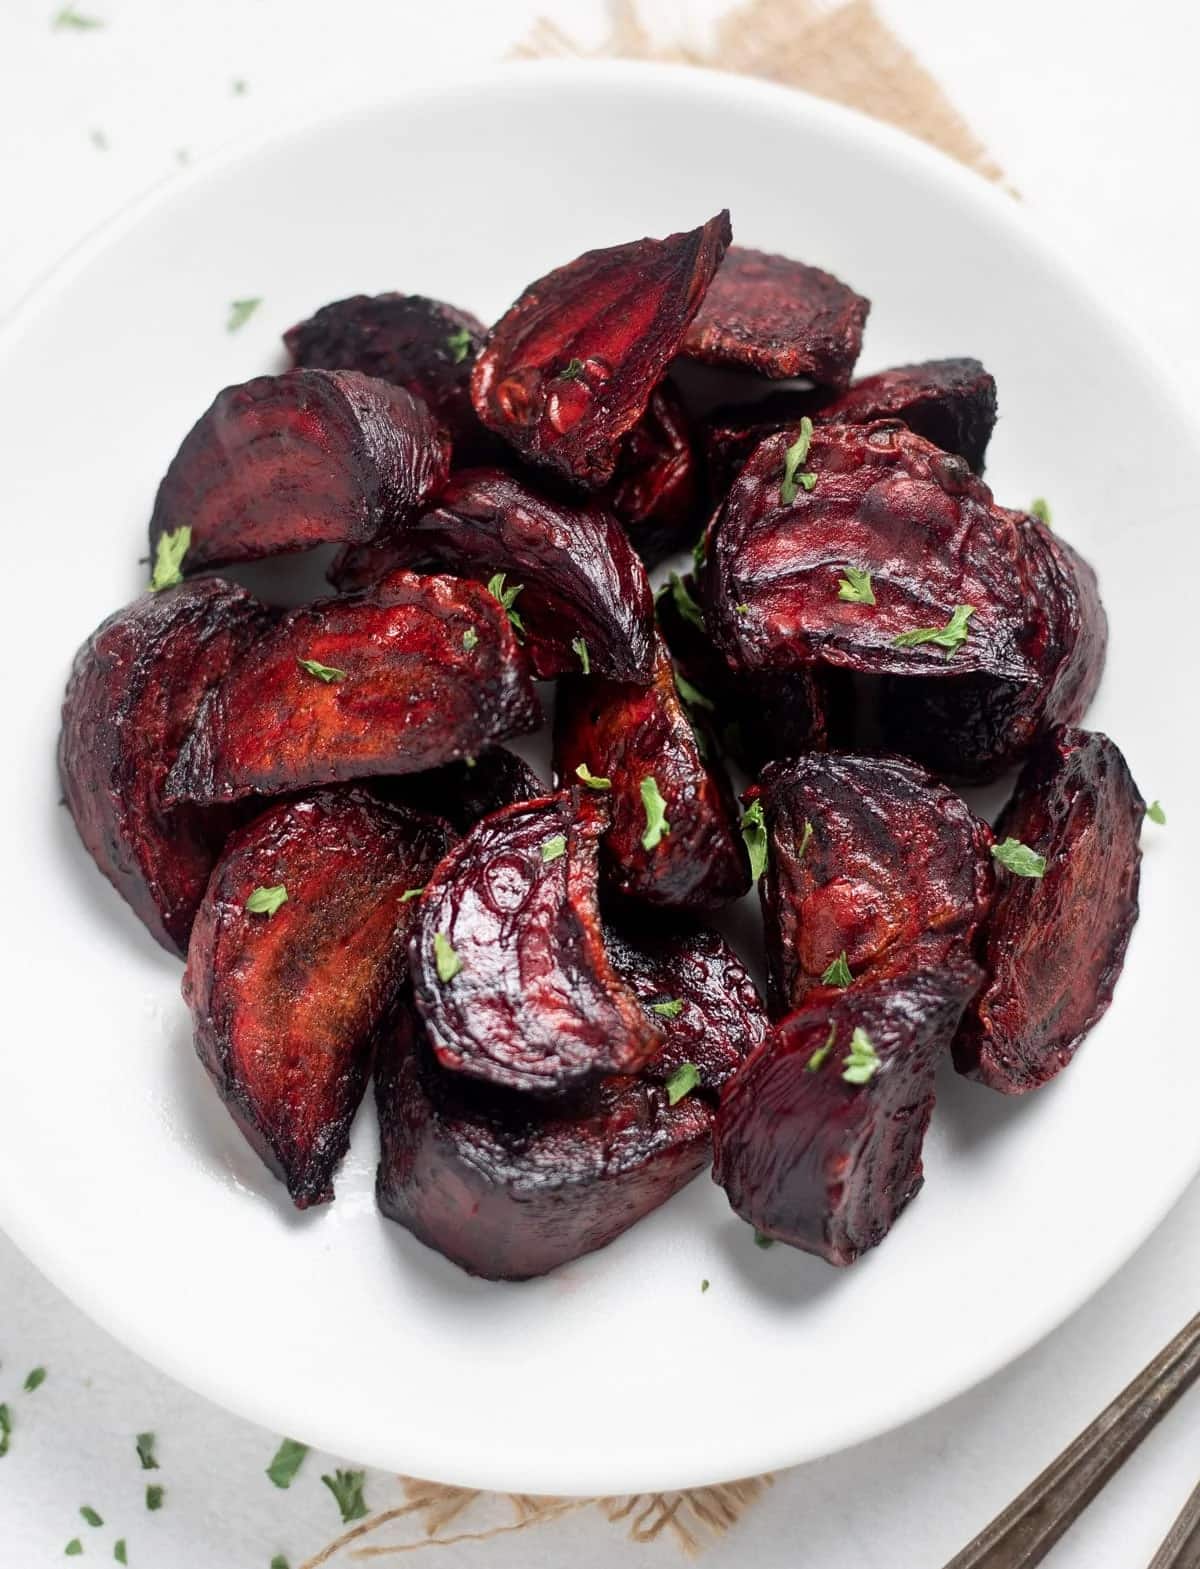 Air fryer roasted beets